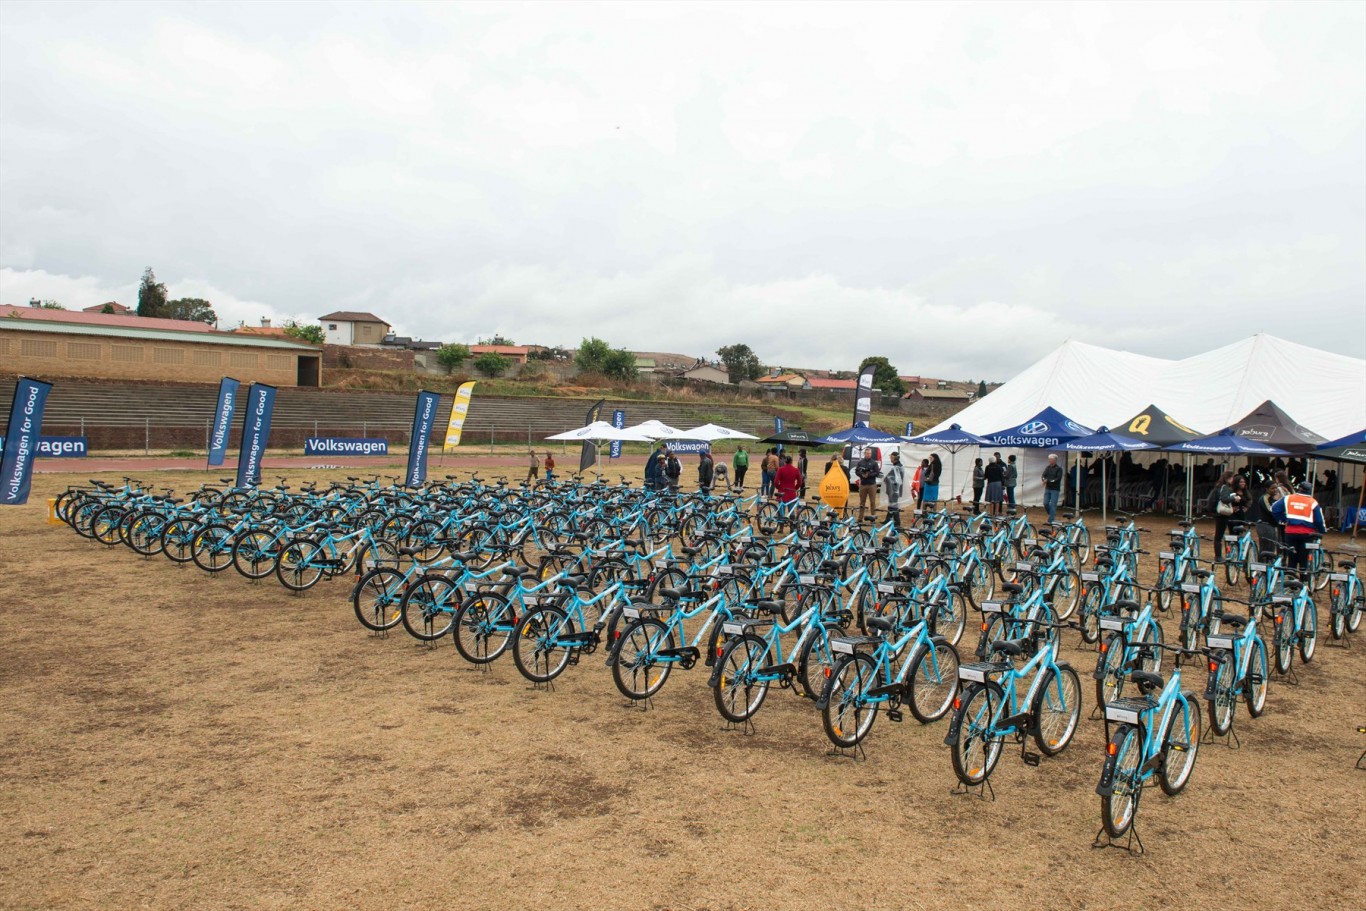 Volkswagen For Good campaign in partnership with Qhubeka puts future in motion